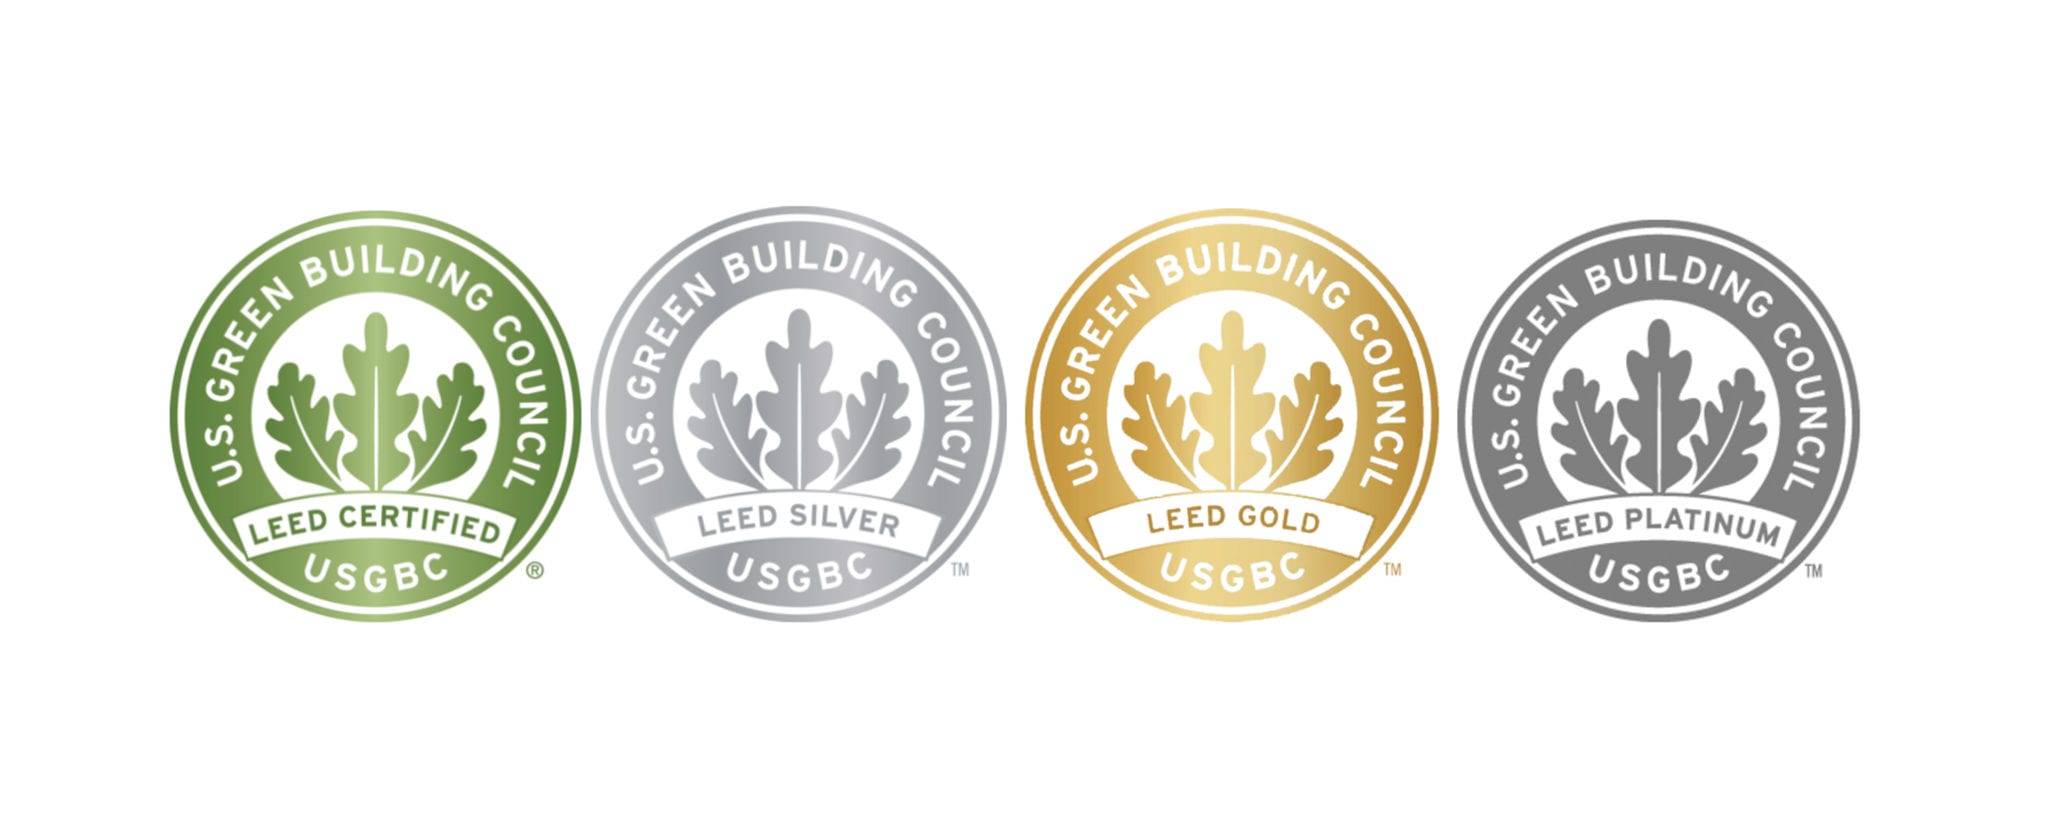 LEED Certification Requirements, Rating System, and Benefits